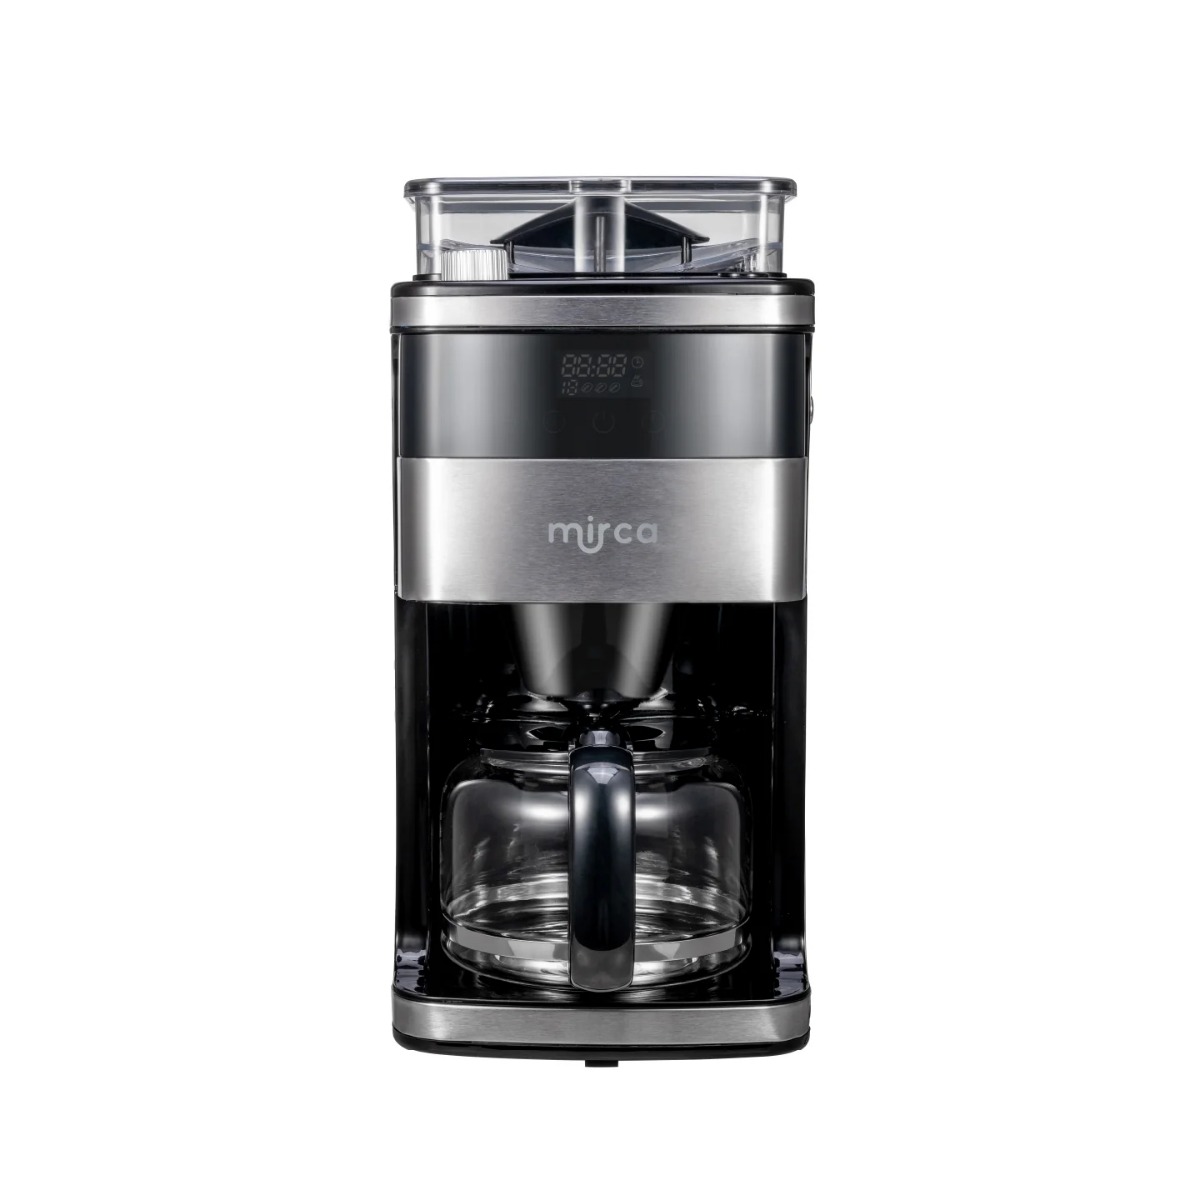 Mirca All In One Coffee Maker